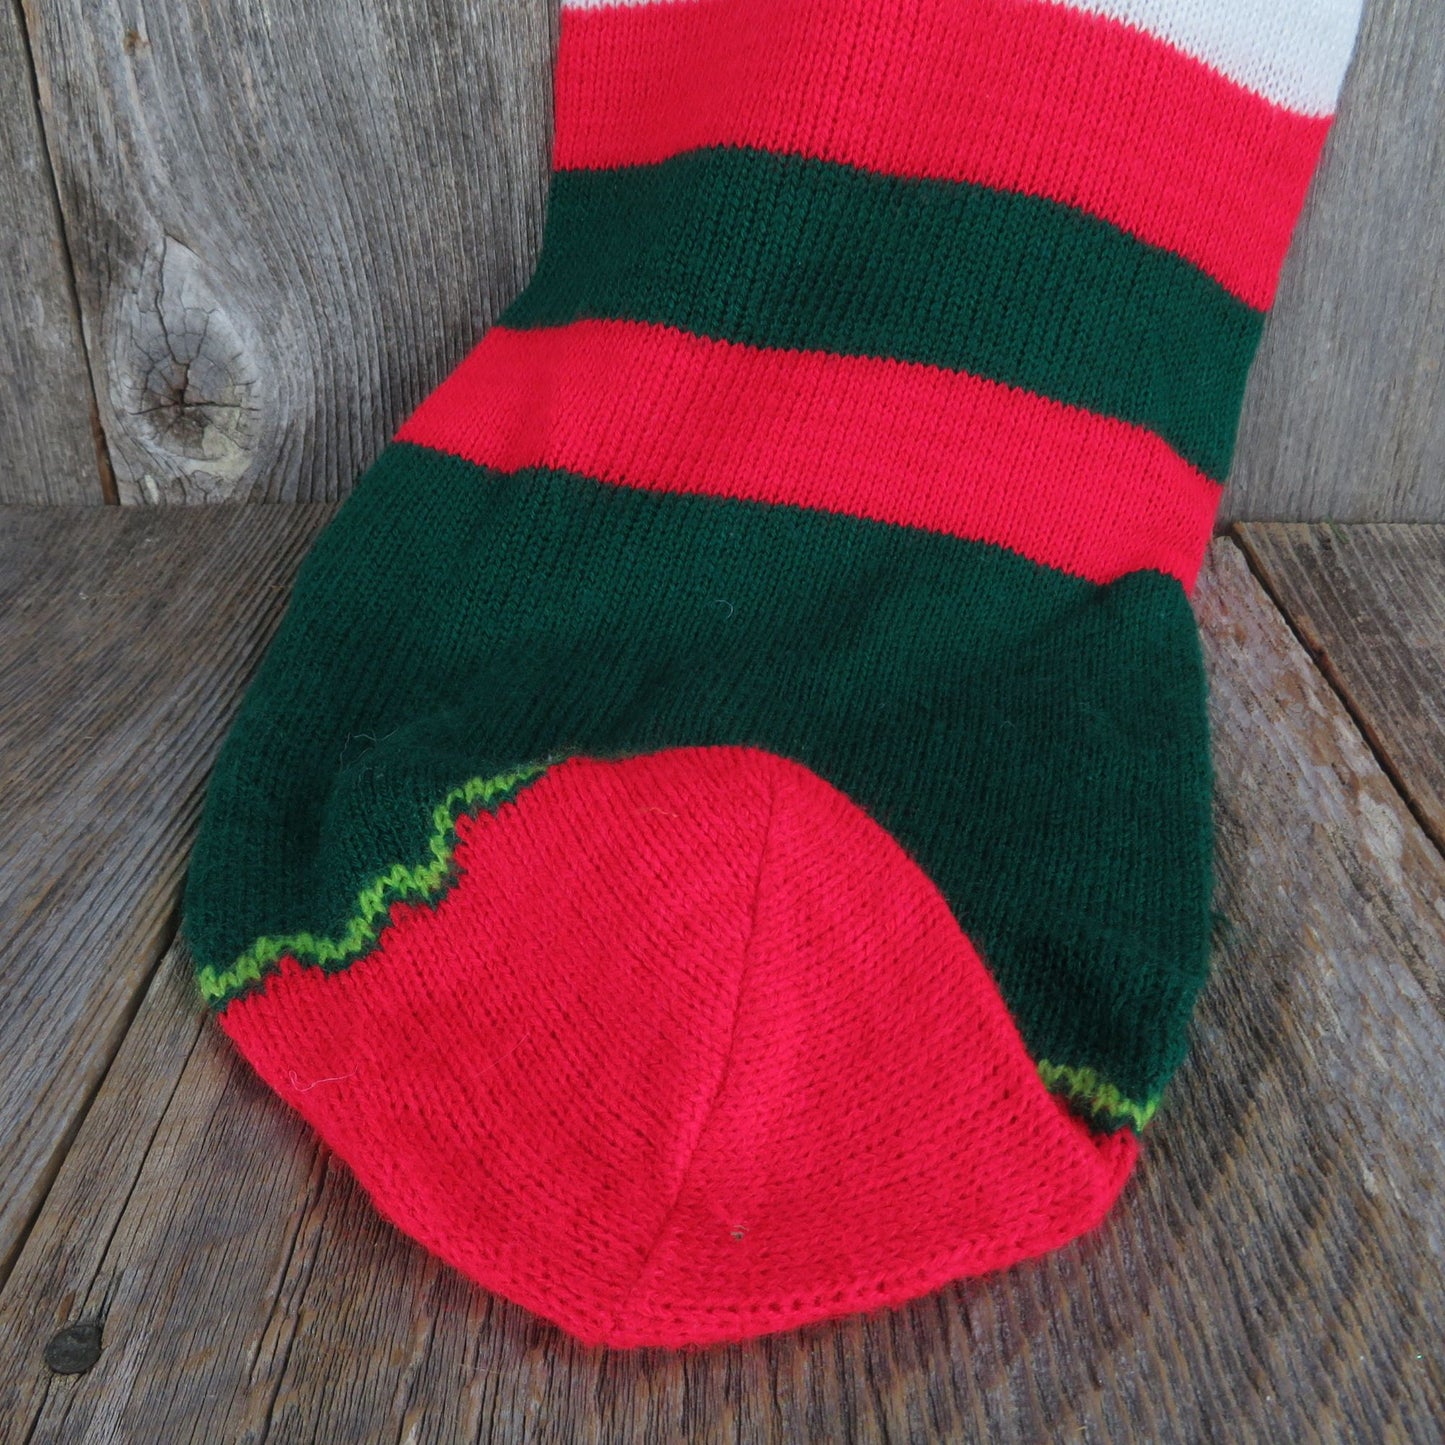 Vintage Wreath Striped Knit Stocking Extra Large Knitted White Green Red Christmas